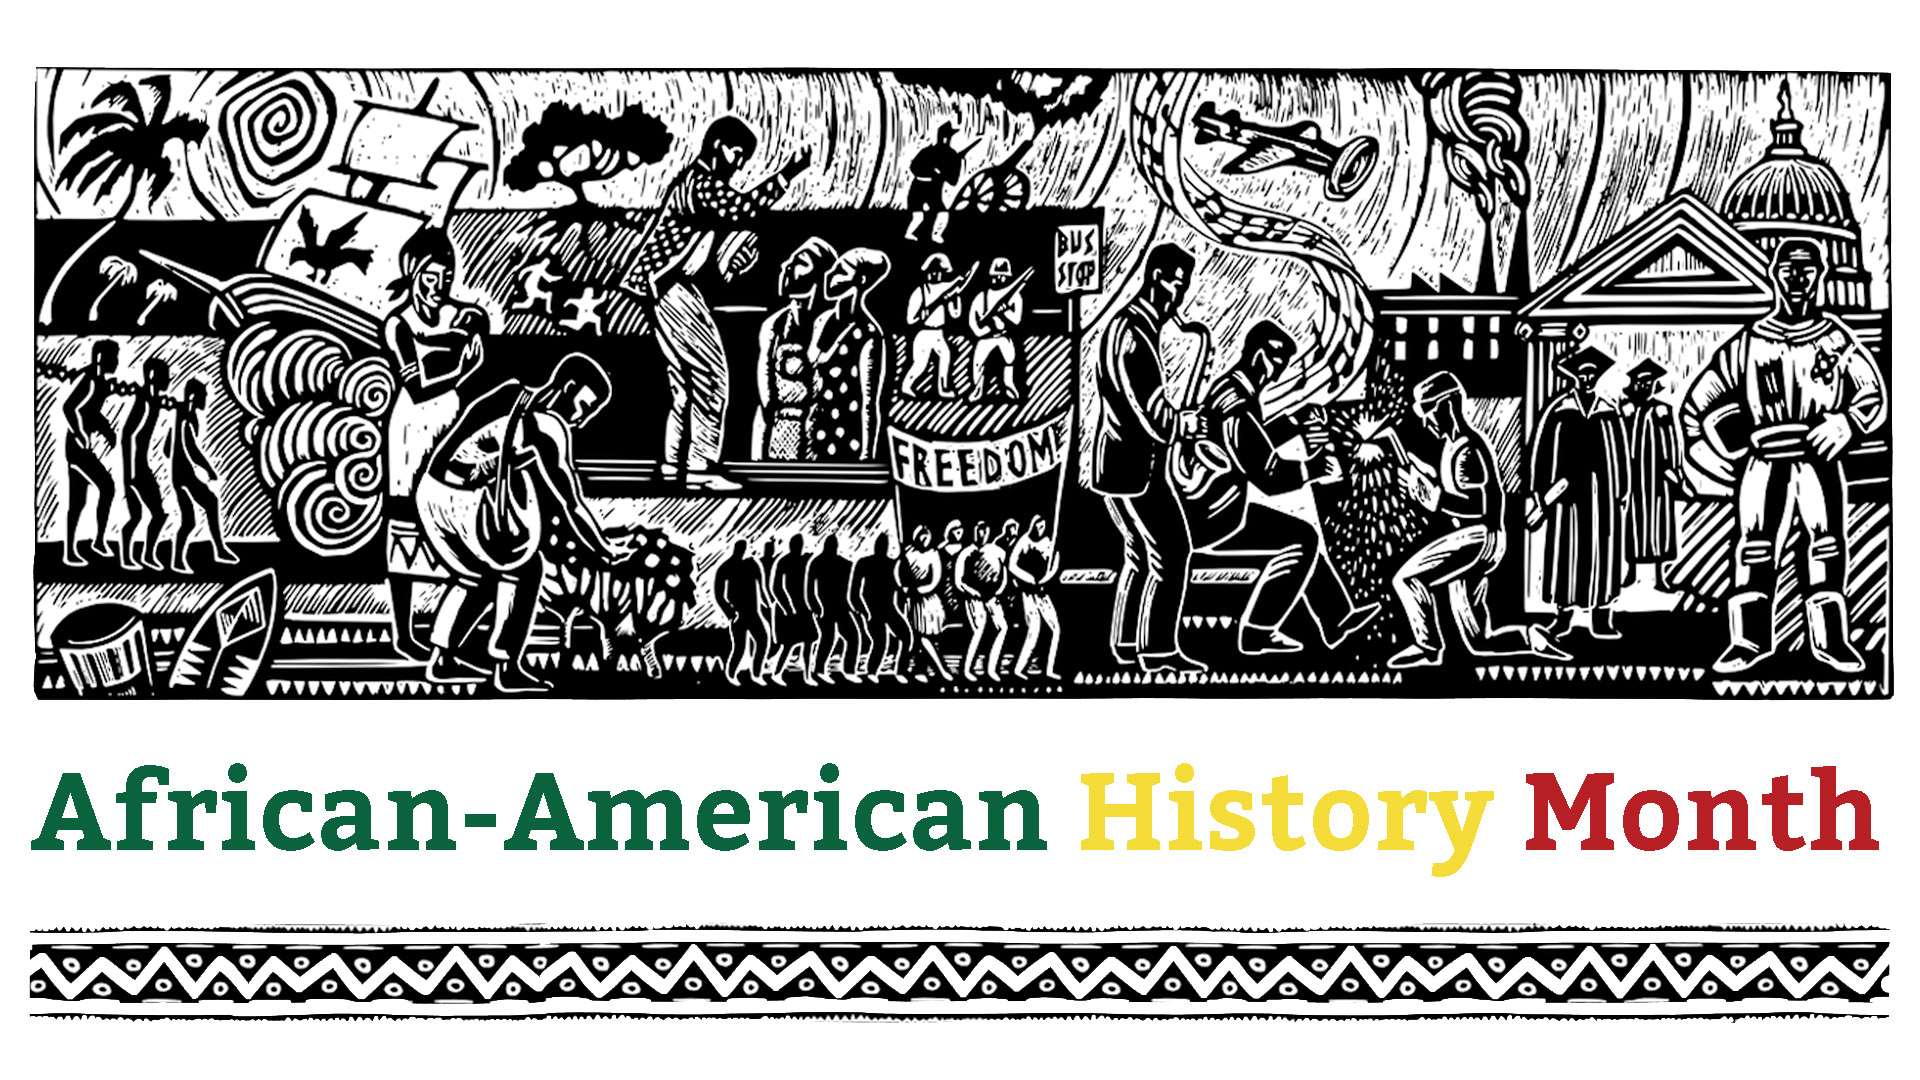 Black and White etched out linoleum block of African-Americans working a number of different jobs. African-American History Month is spread across the bottom of the graphic in Green, yellow, and red text.